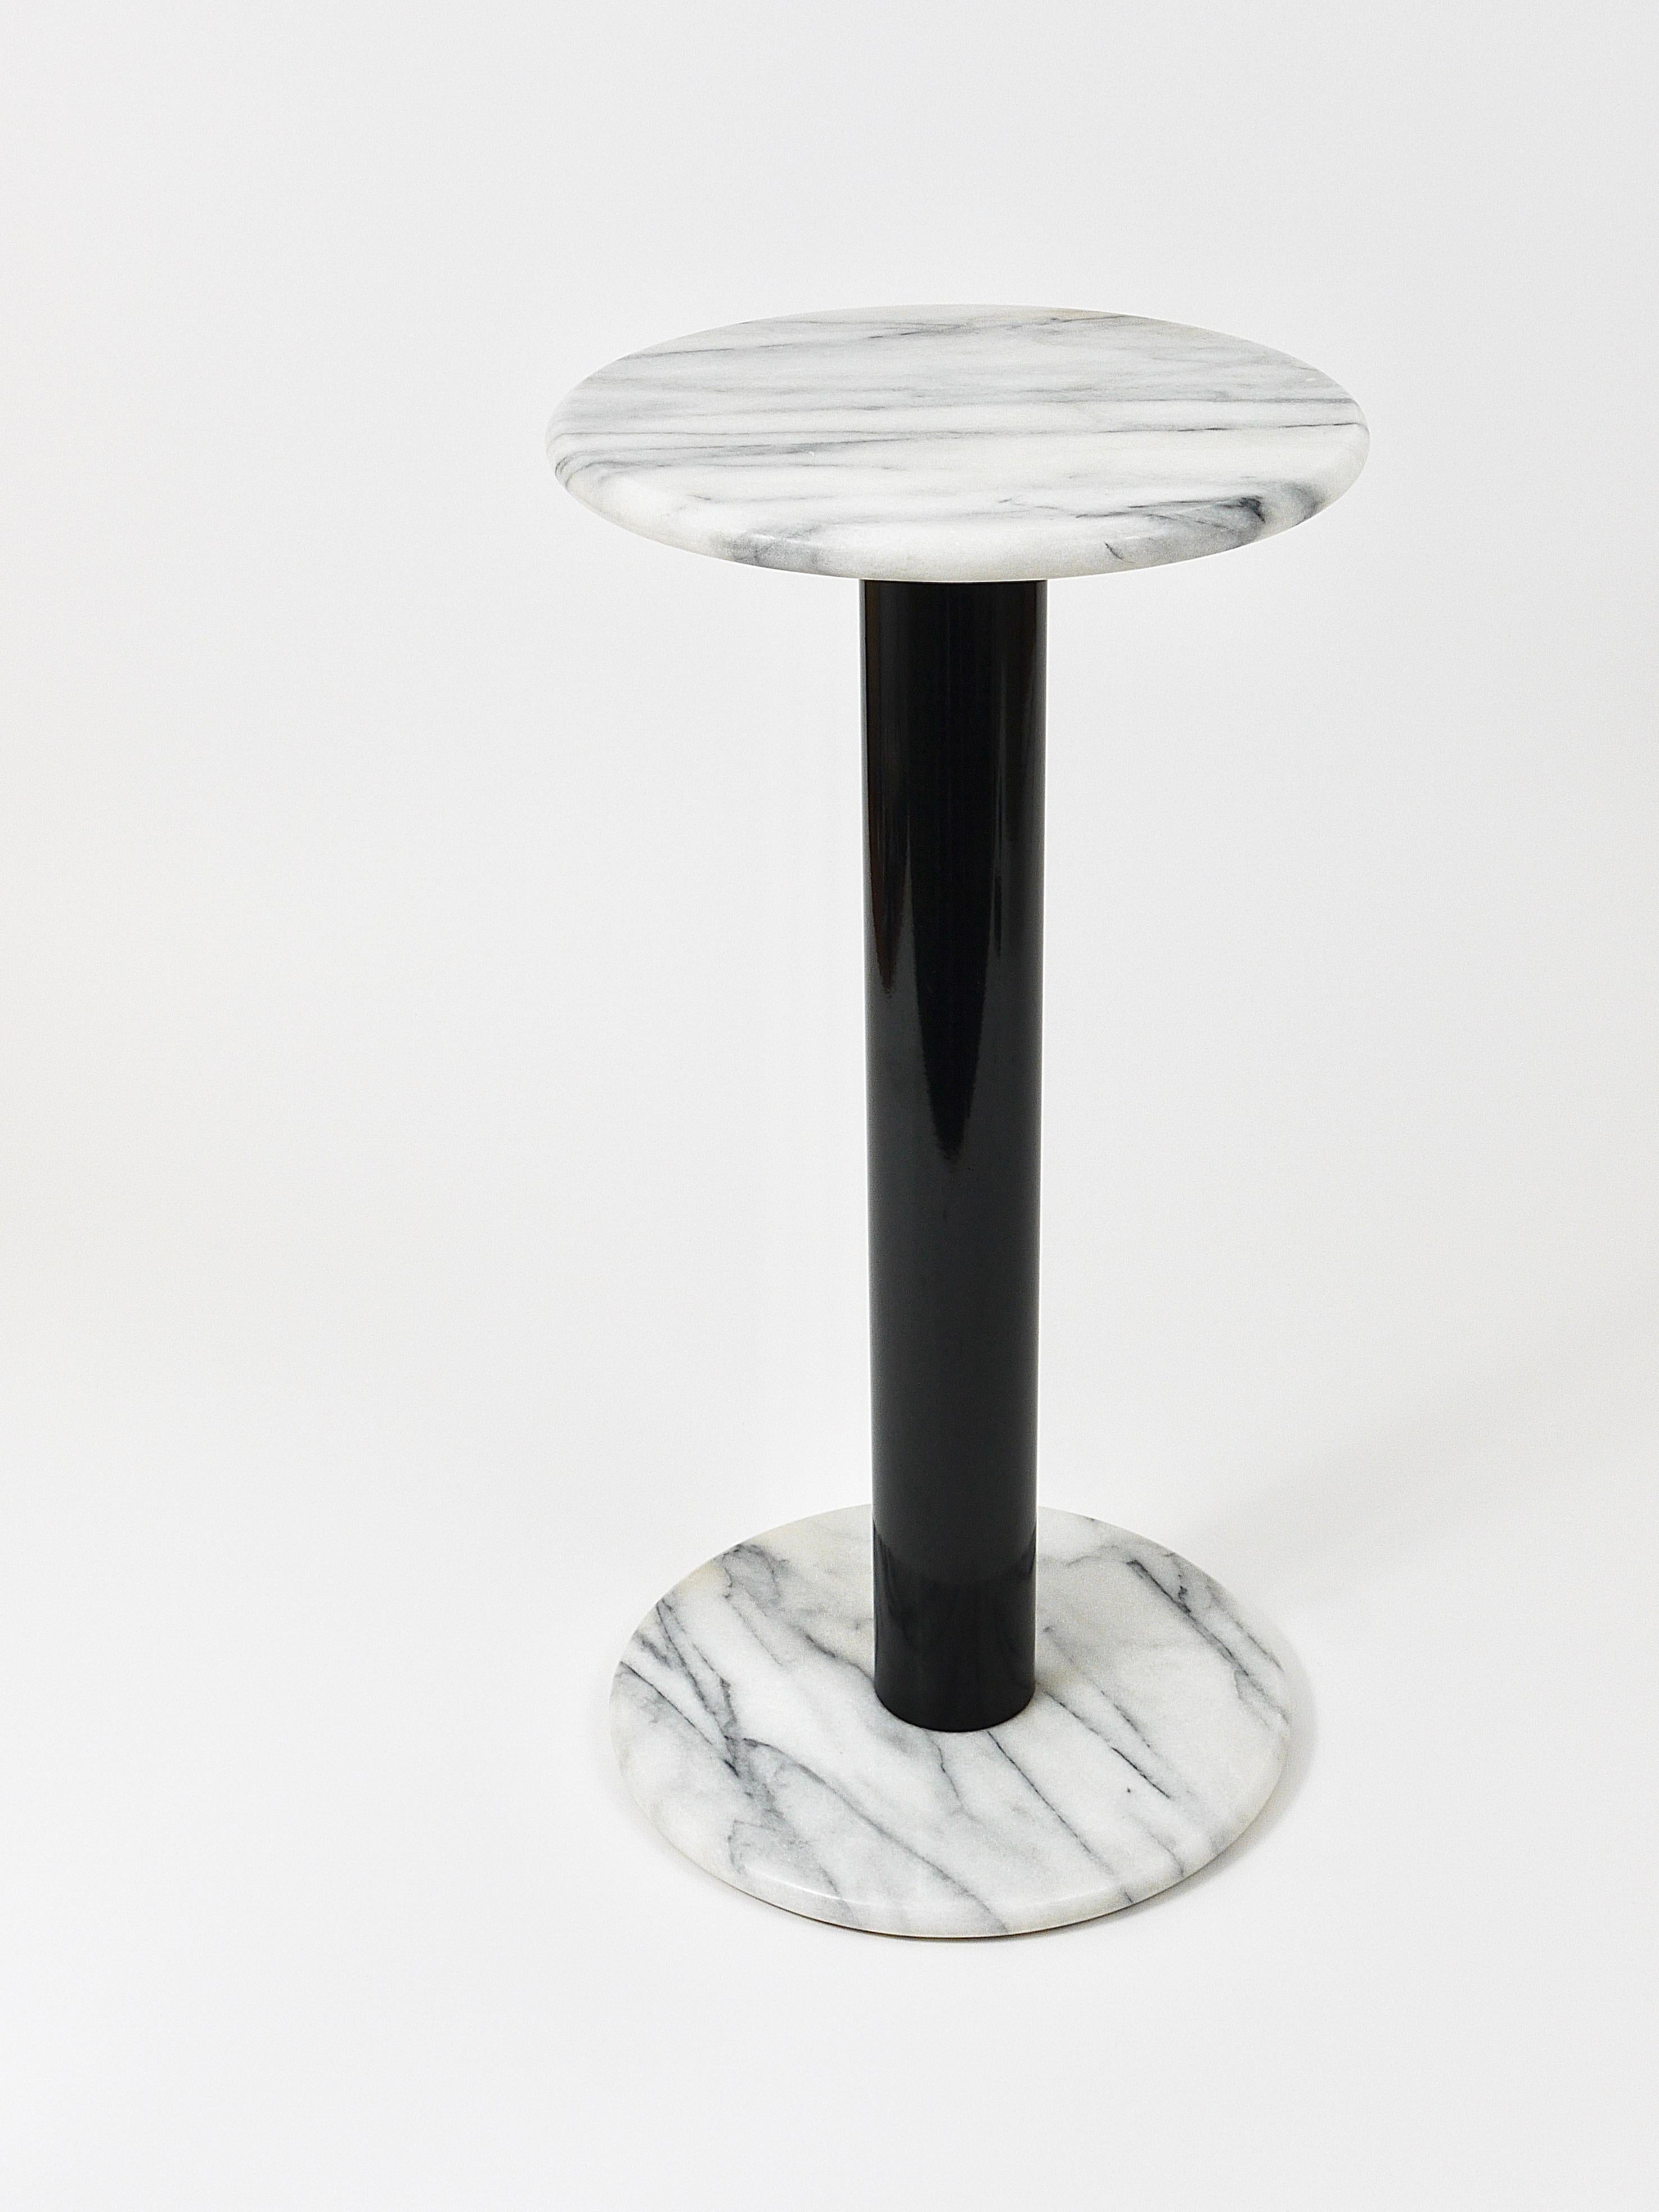 Postmodern White Carrara Marble Flower Stand Pedestal Table, Italy, 1980s For Sale 11